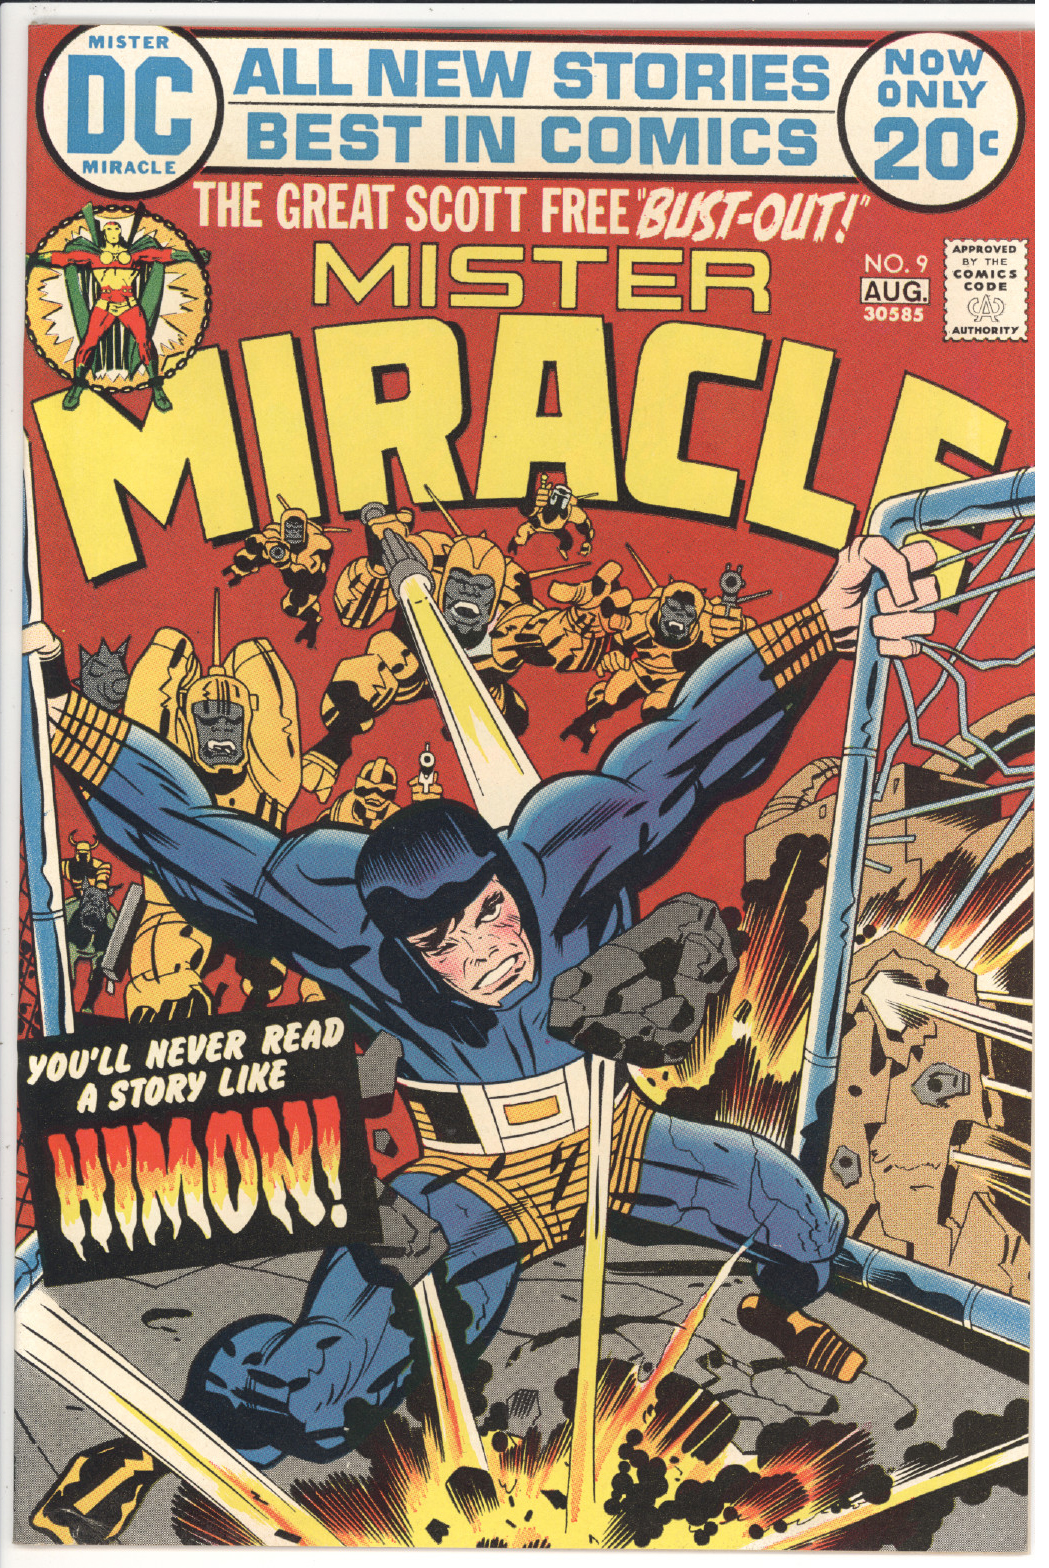 Mister Miracle #9 front